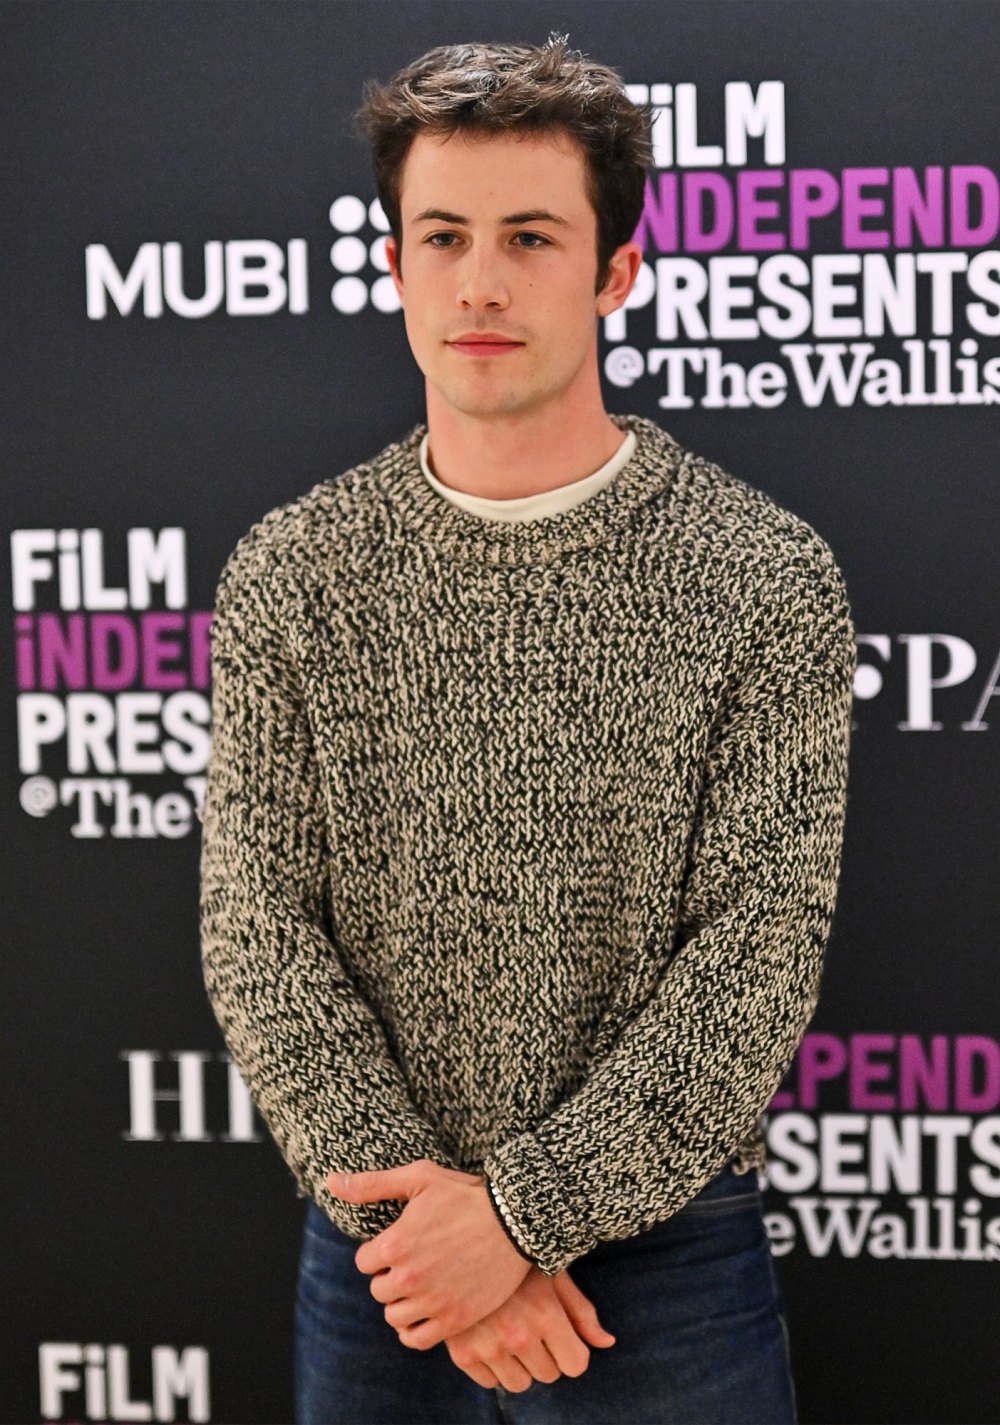 Dylan Minnette Sparks Romance Rumors With Model Isabella Elai at Coachella After Lydia Night Split- Details 002